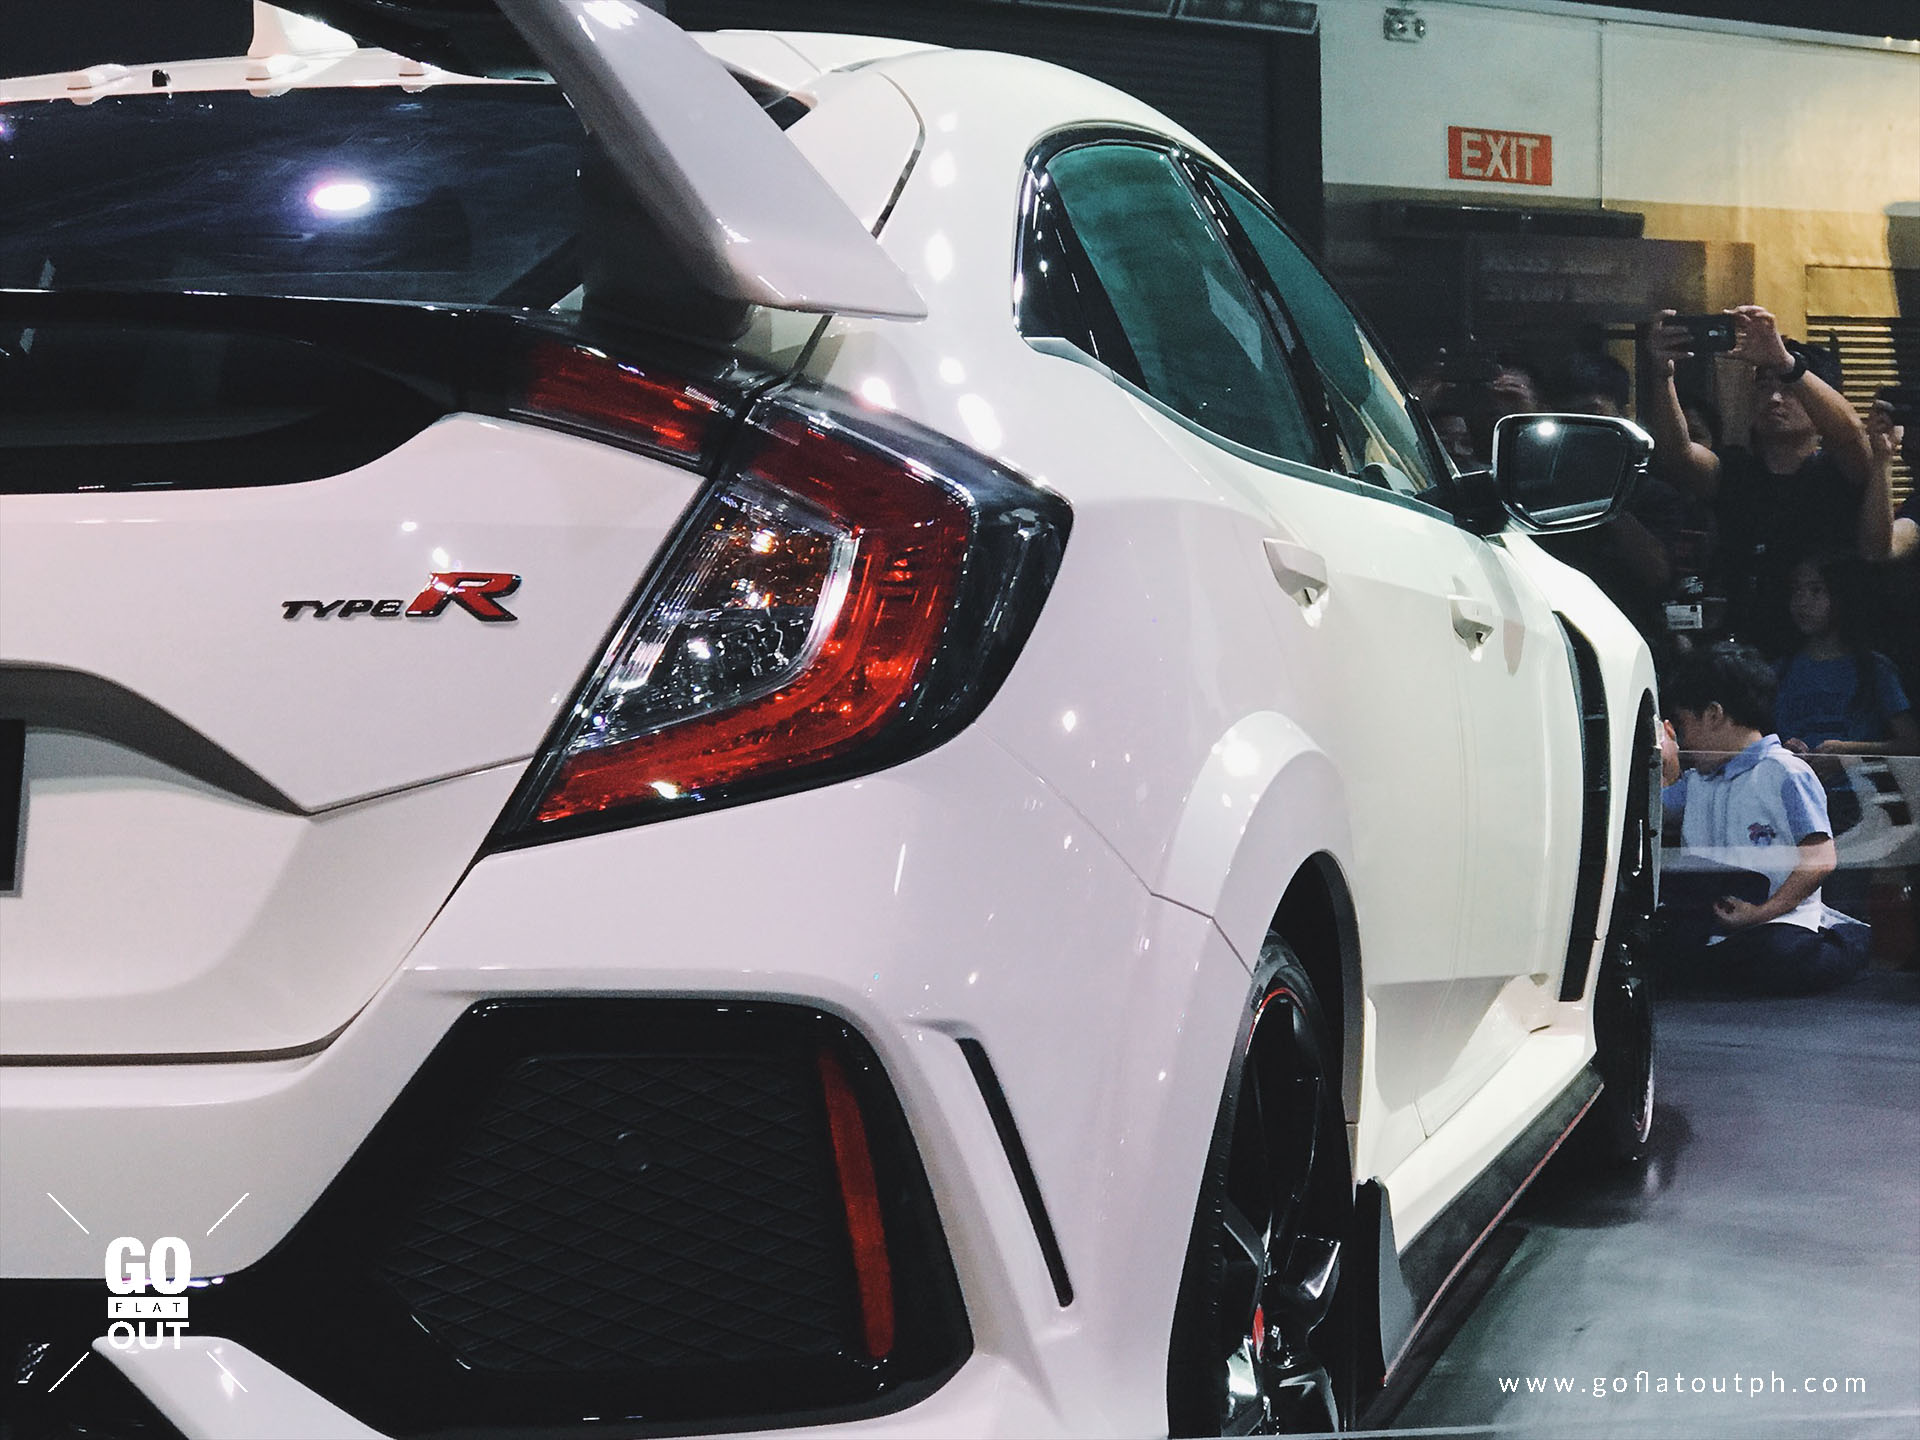 17 Mias The Honda Civic Type R Is Probably The Reason Why You D Go To Mias Go Flat Out Ph